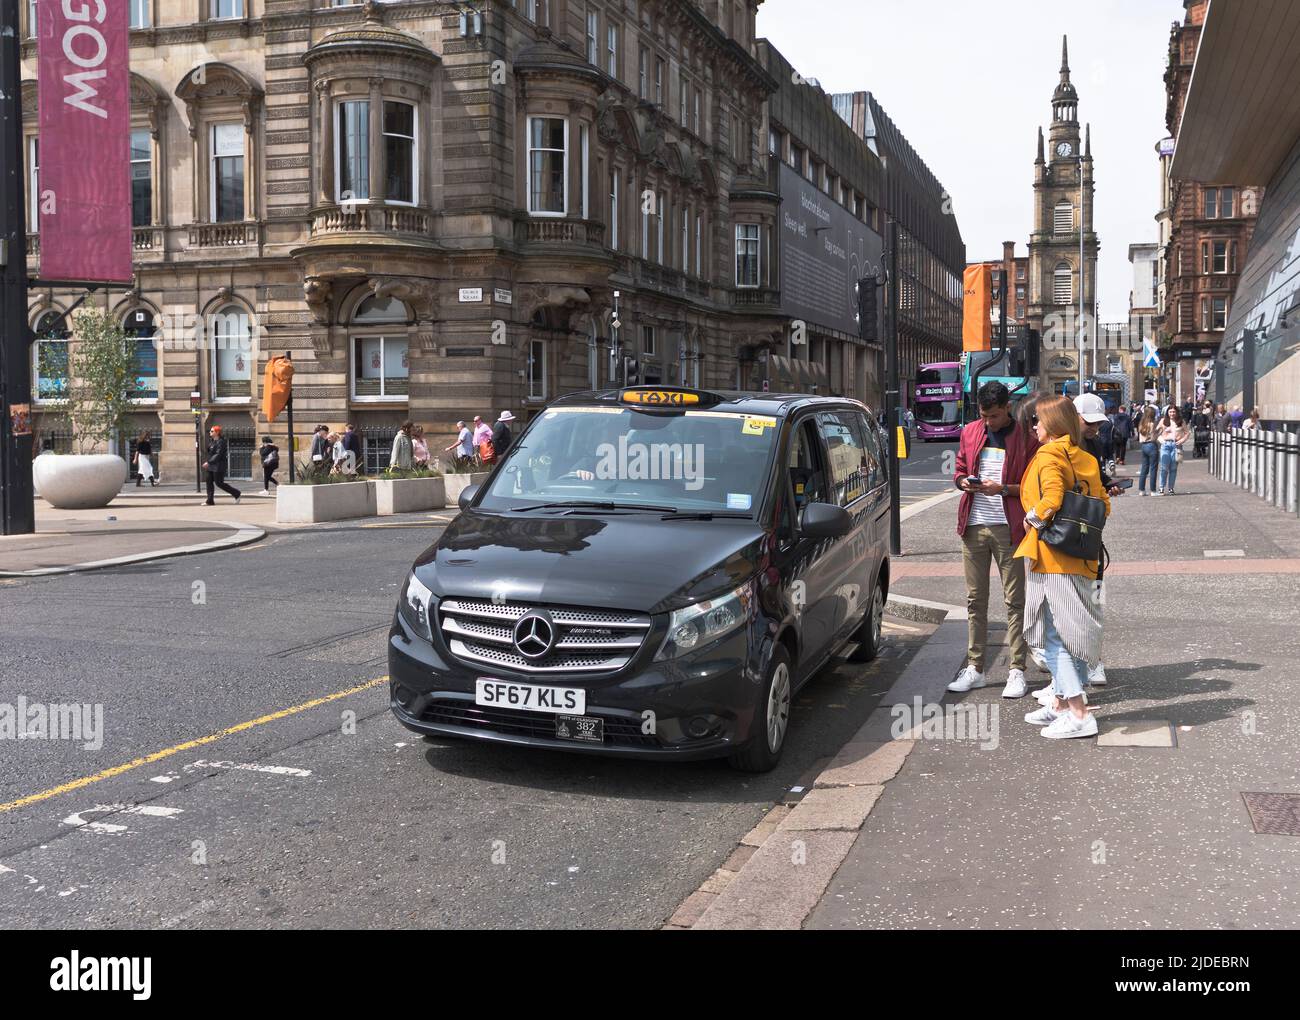 dh taxis GEORGE STREET GLASGOW touristes taxi personnes taxis ecosse royaume-uni Banque D'Images